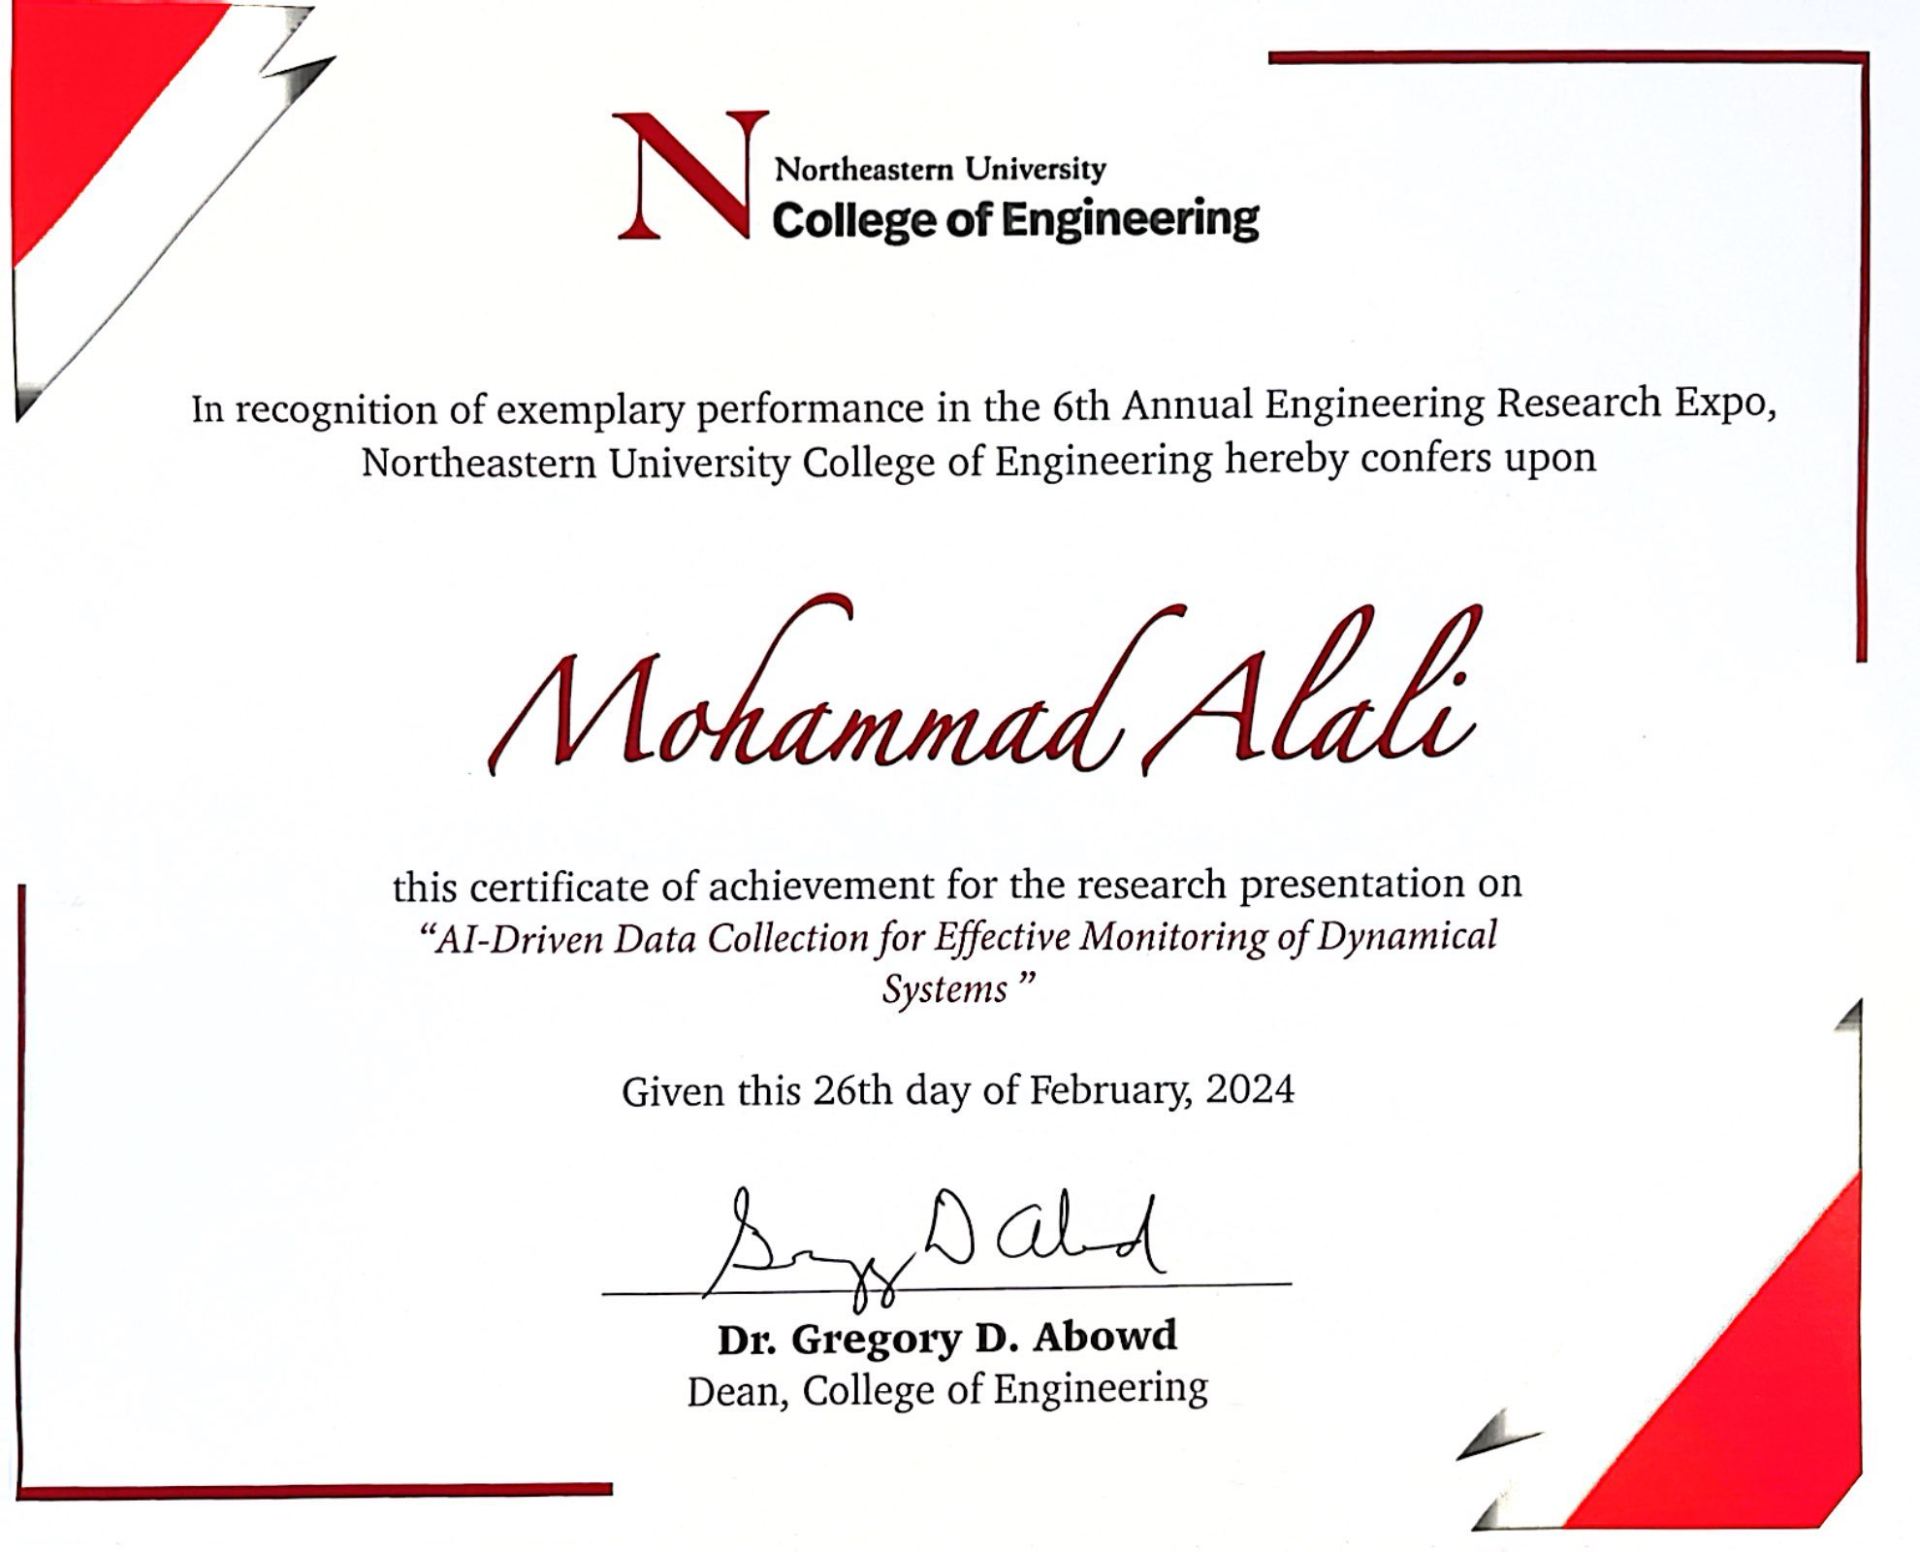 6th Annual Engineering Research Expo Audience Choice Award Certificate